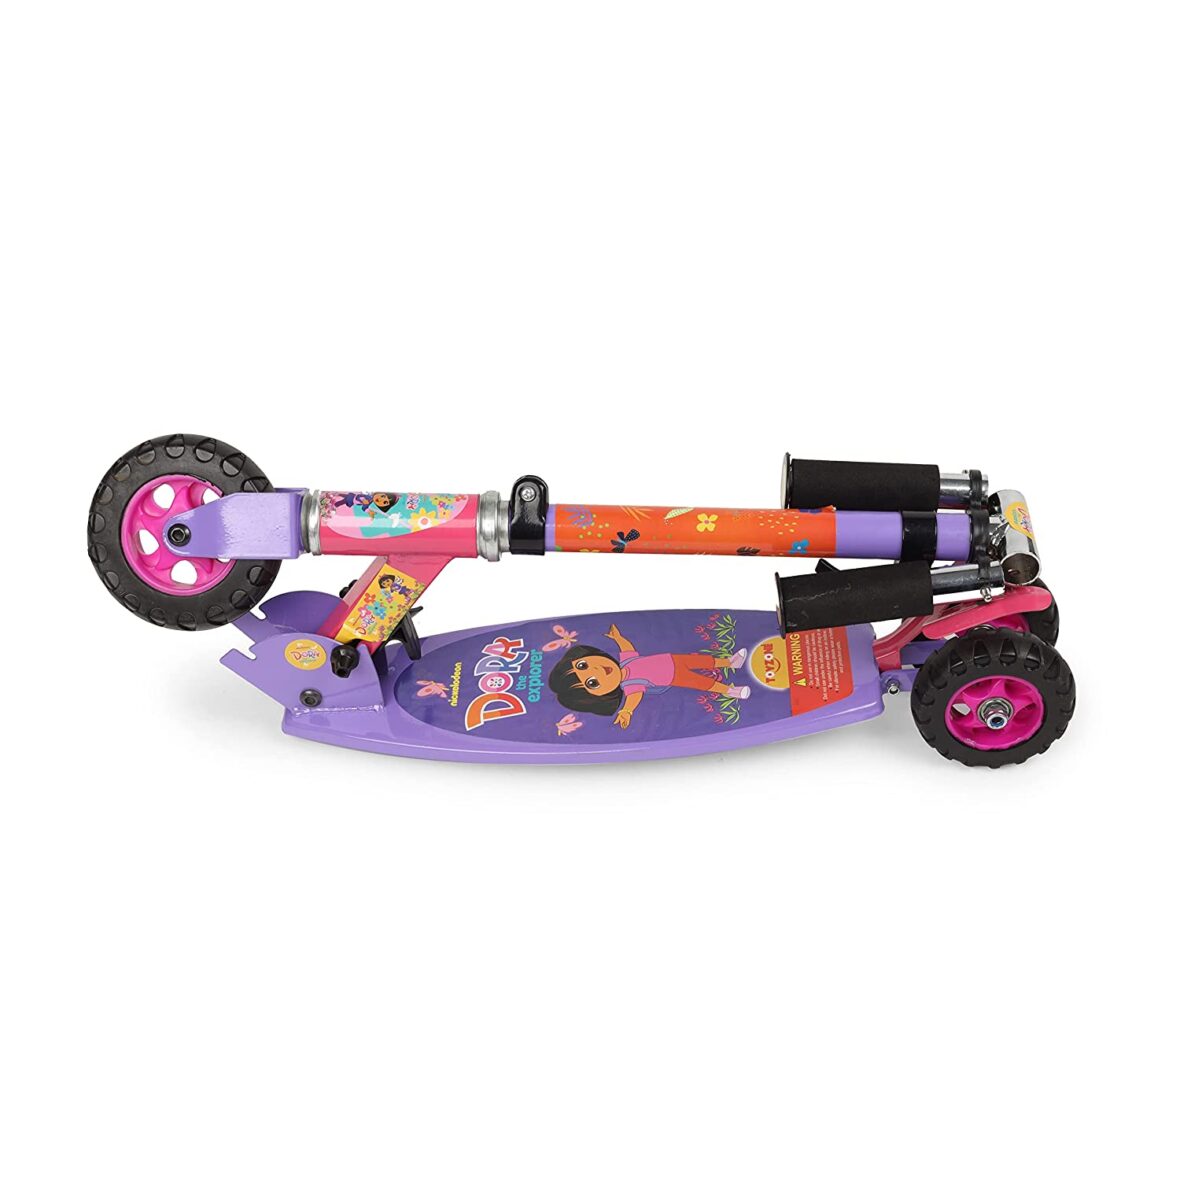 Toyzone Dora Scooter Oval-66156 | Kids Skate |3 Wheel Kids Scooter | Smart Kick Scooter | Adjustable Height and Rear Brake | Foldable Scooter | for Kids Age 6+ Years